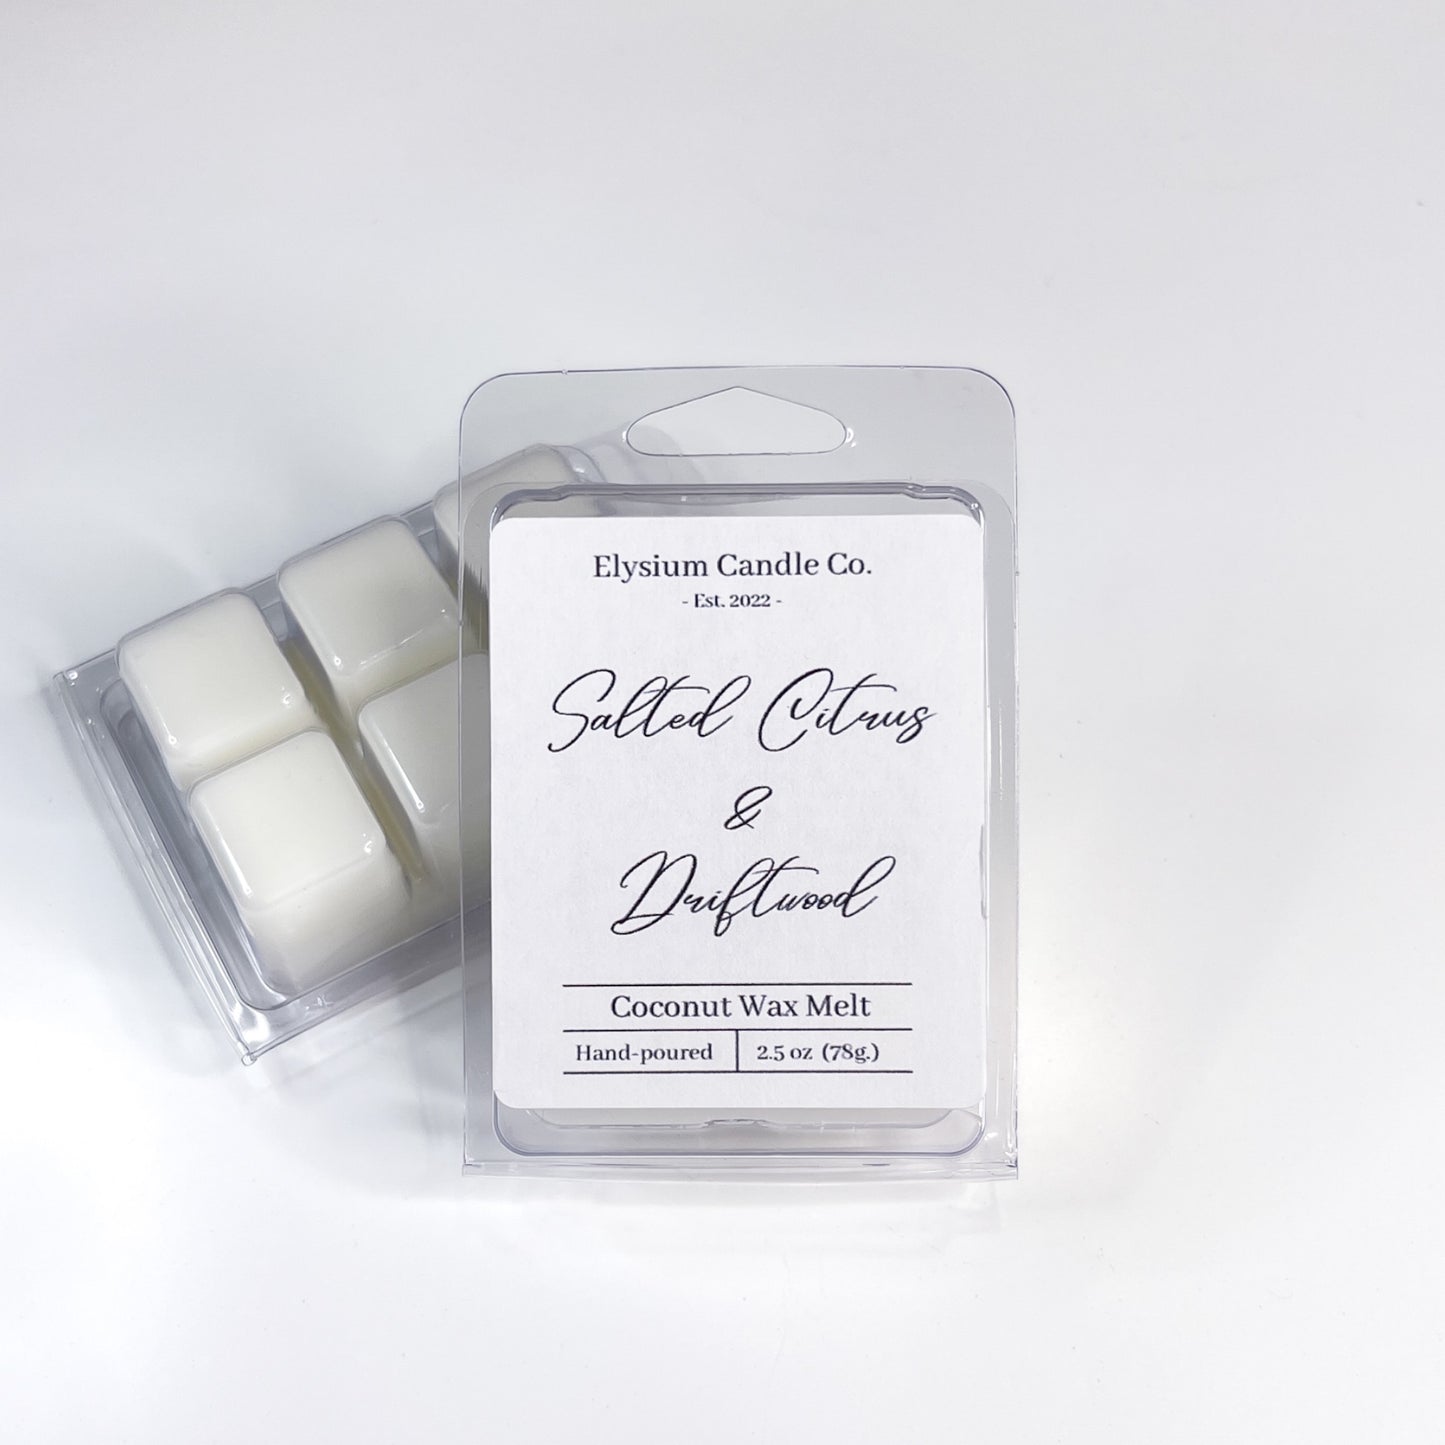 salted citrus and driftwood scented wax melt